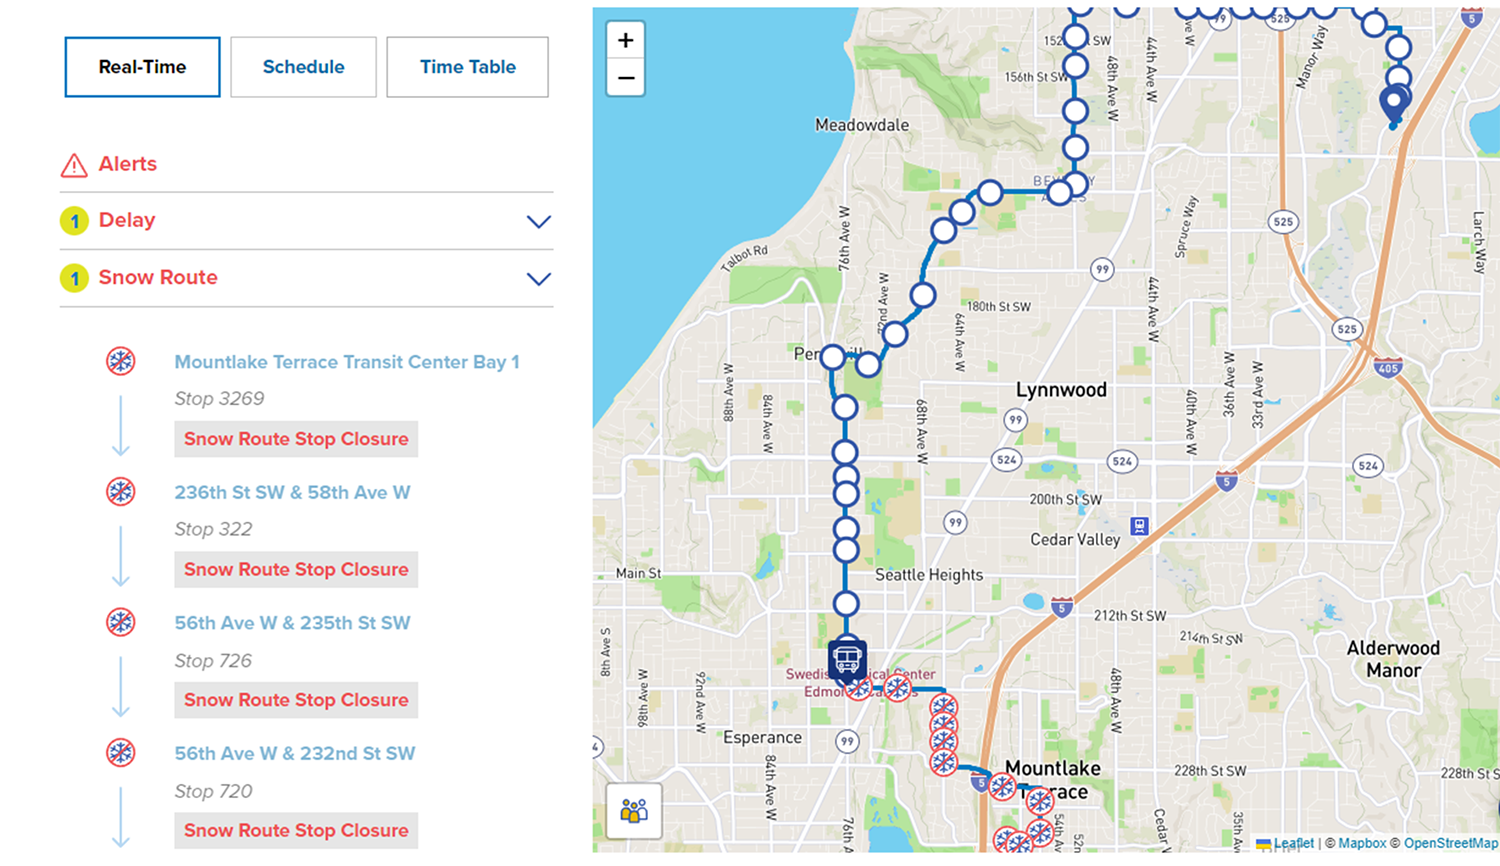 Example of a snow route on a realtime map in Find My Bus